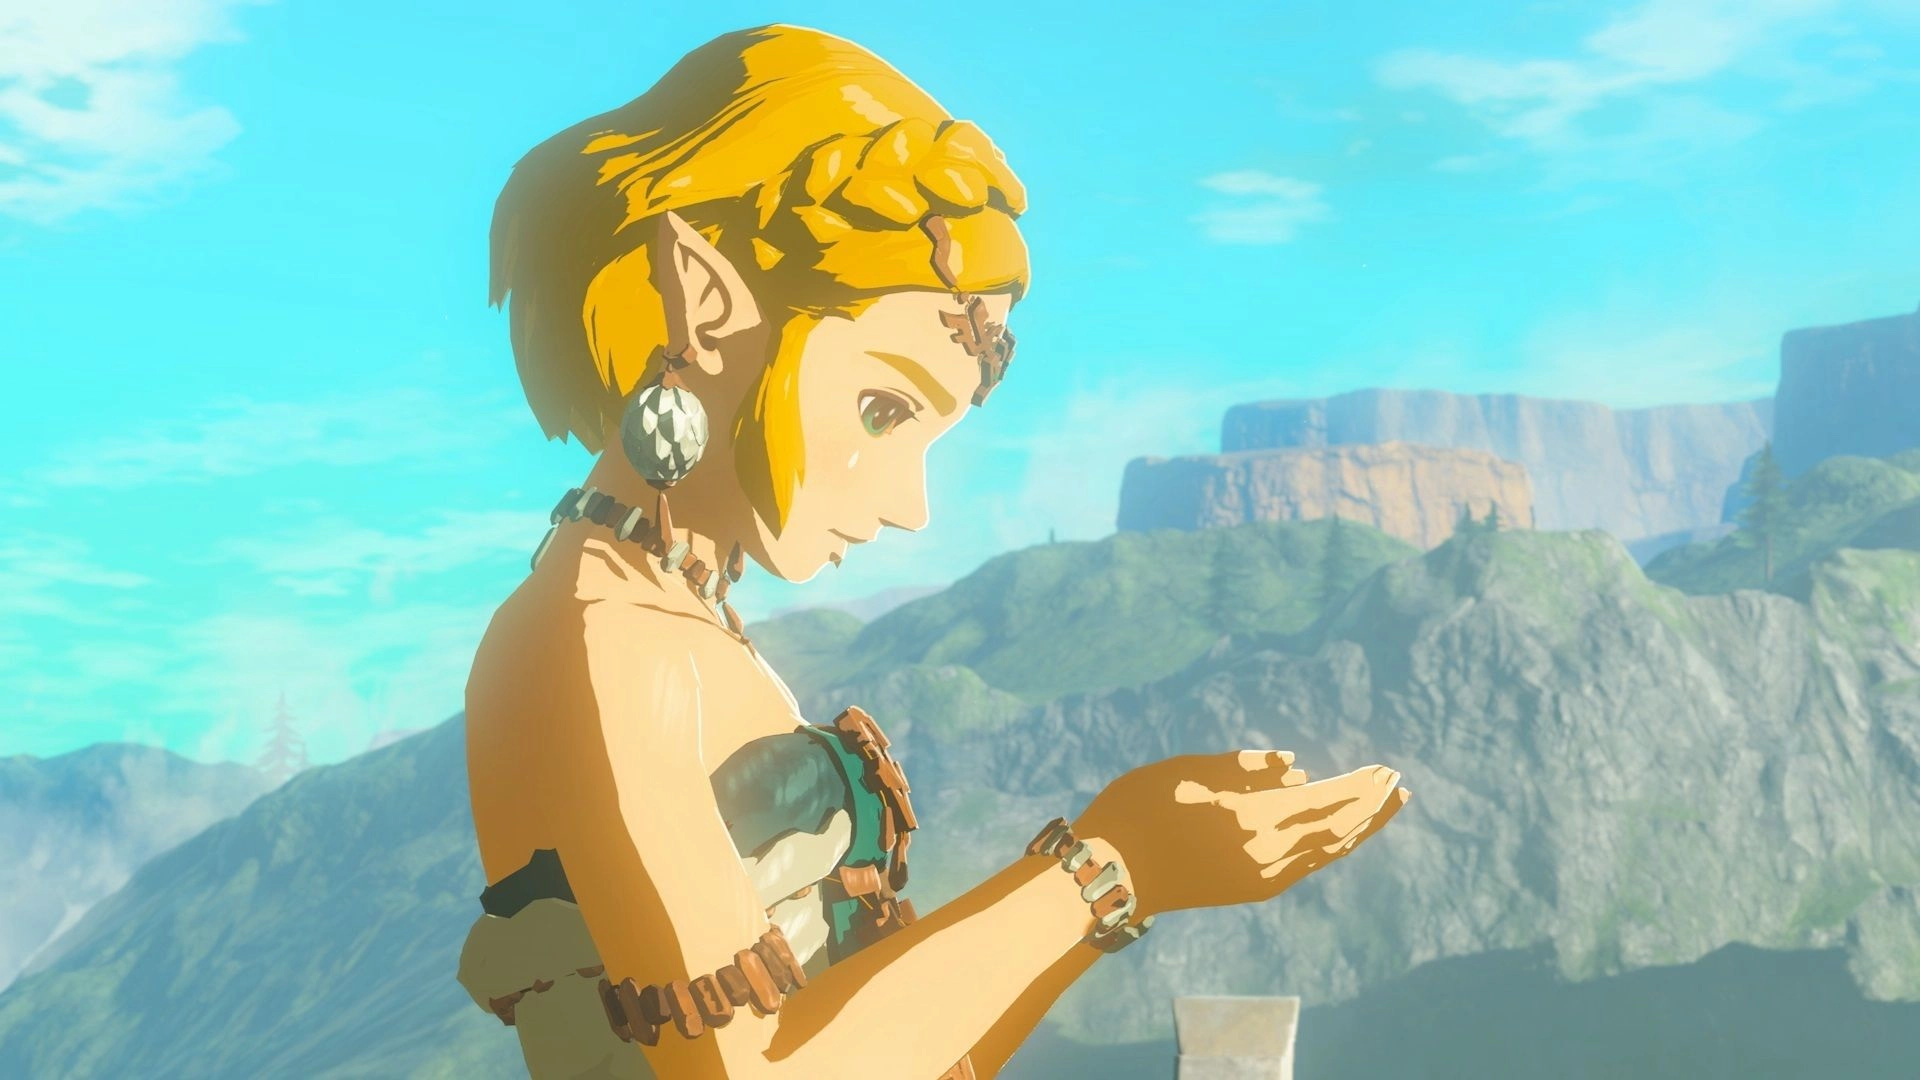 Breath of the Wild Fans Weep over Mysterious Absence